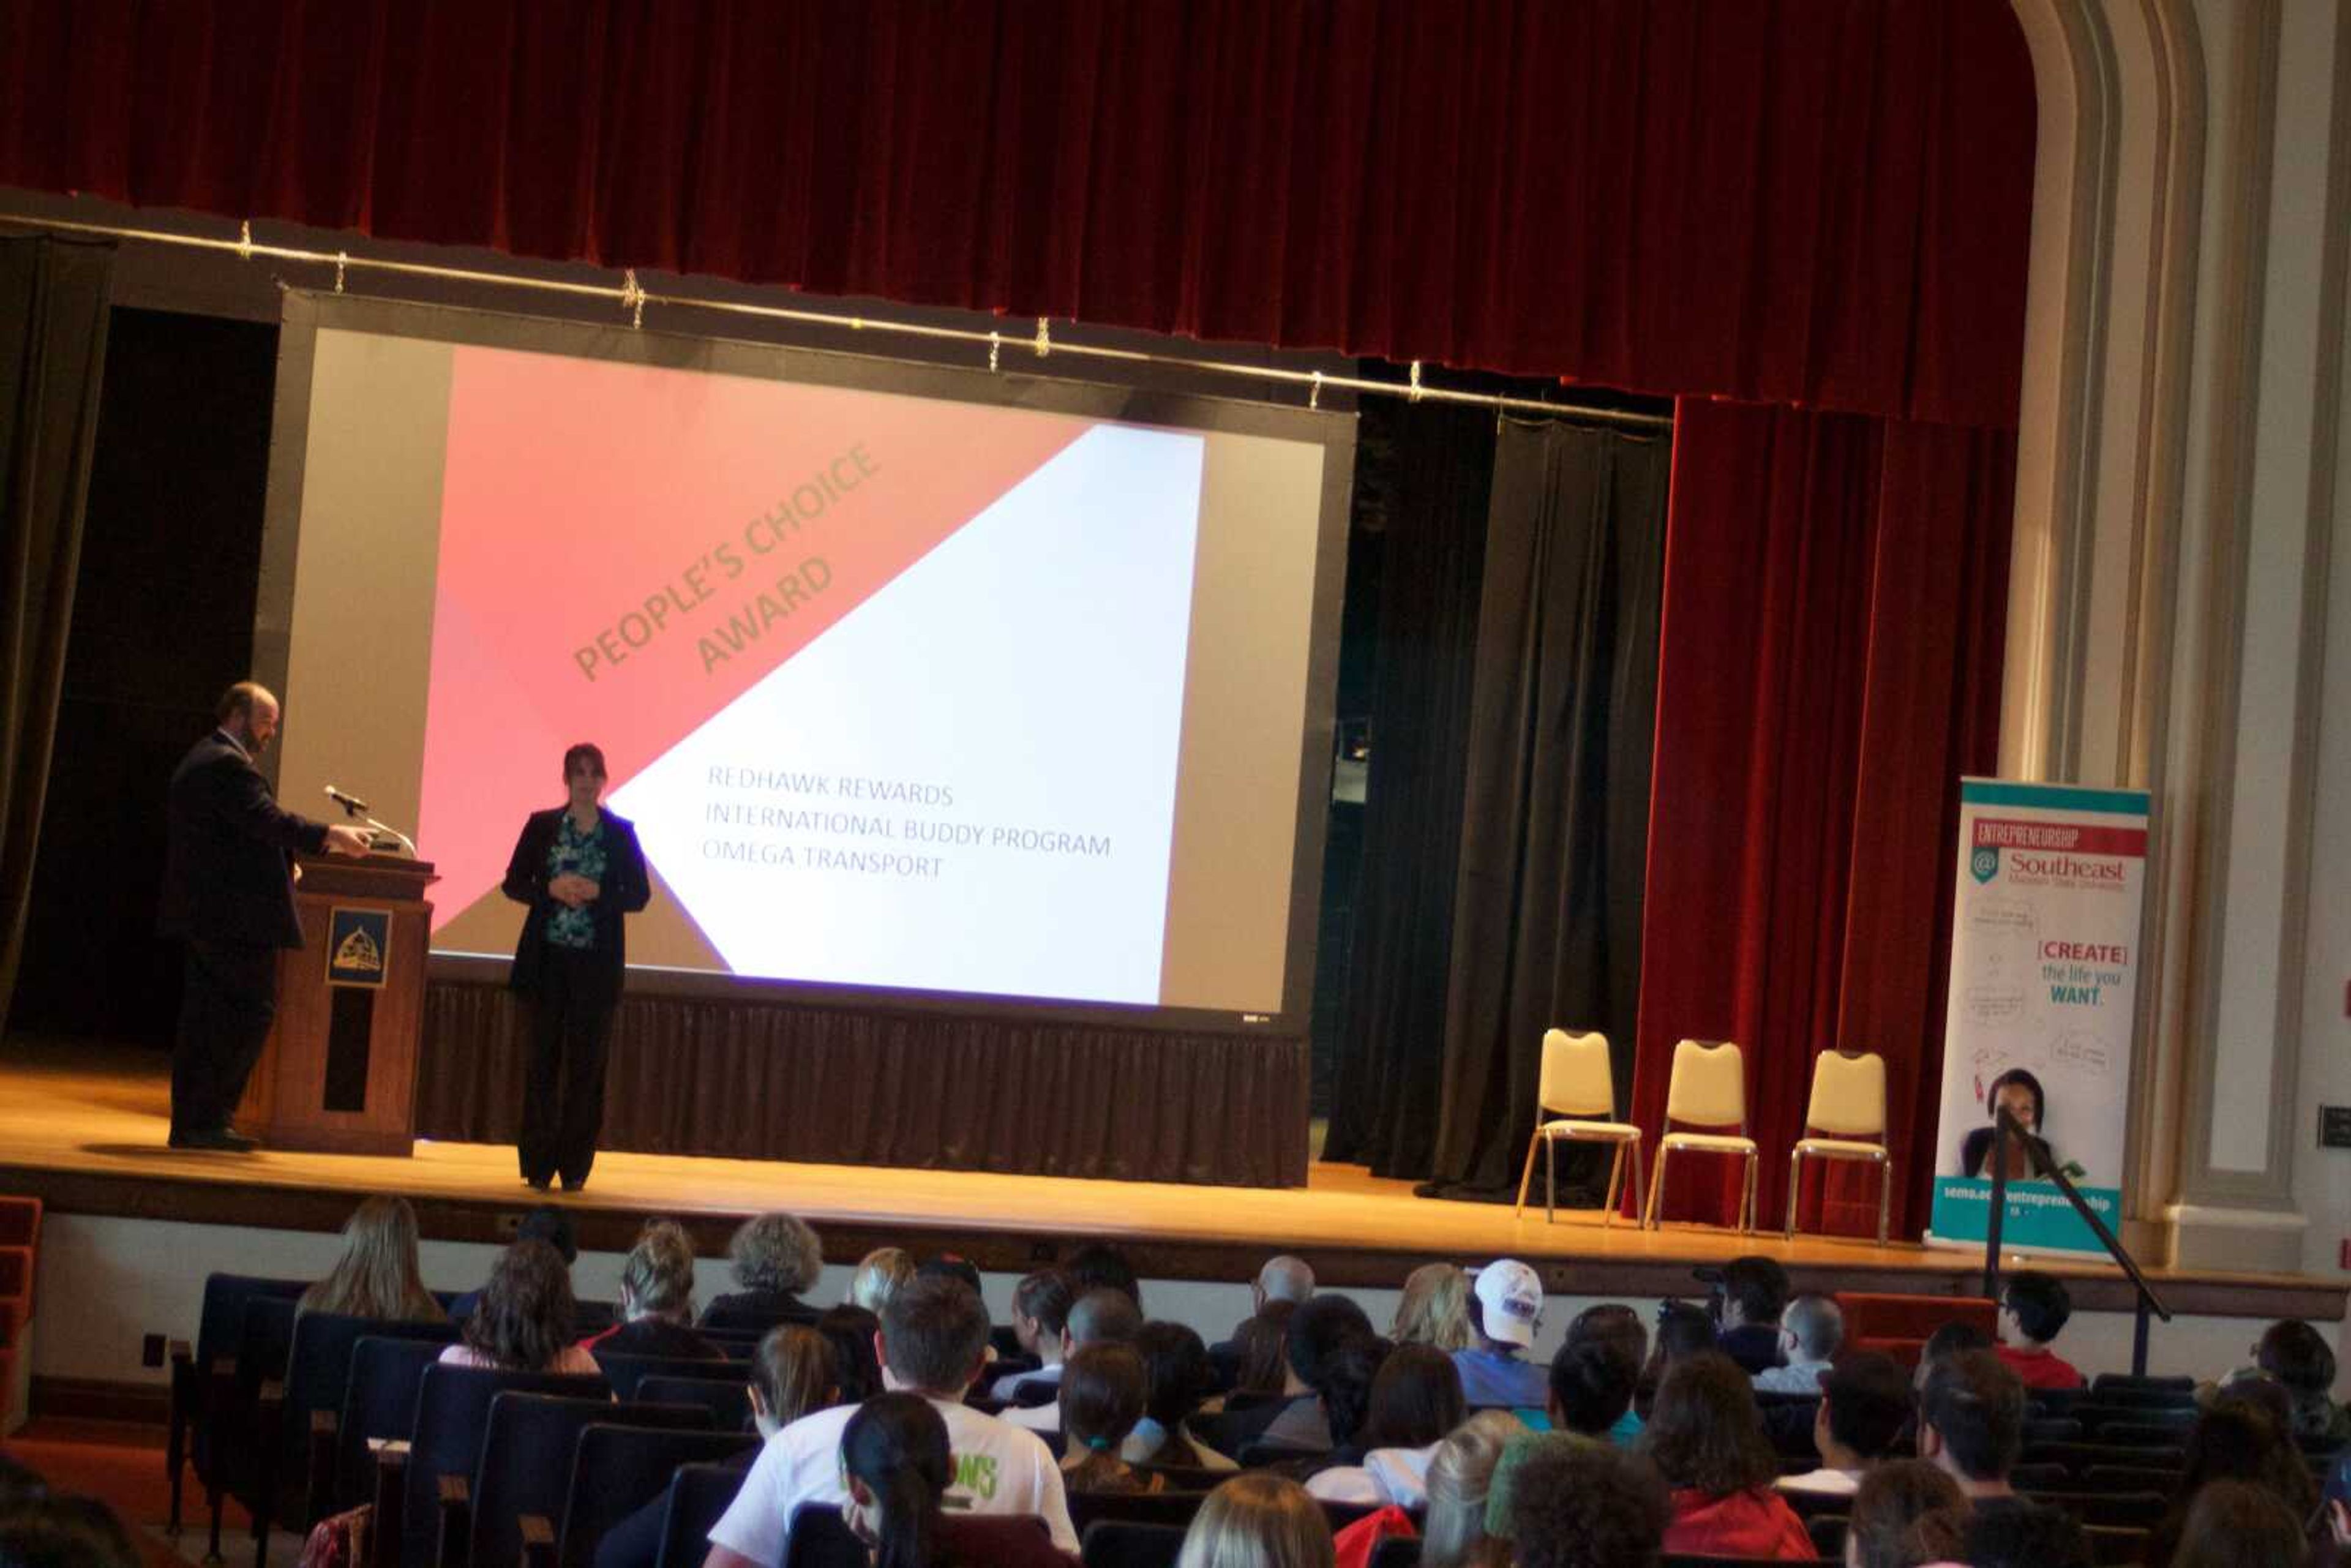 Southeast hosted the Innovation Challenge to inspire students during Global Entrepreneurship Week